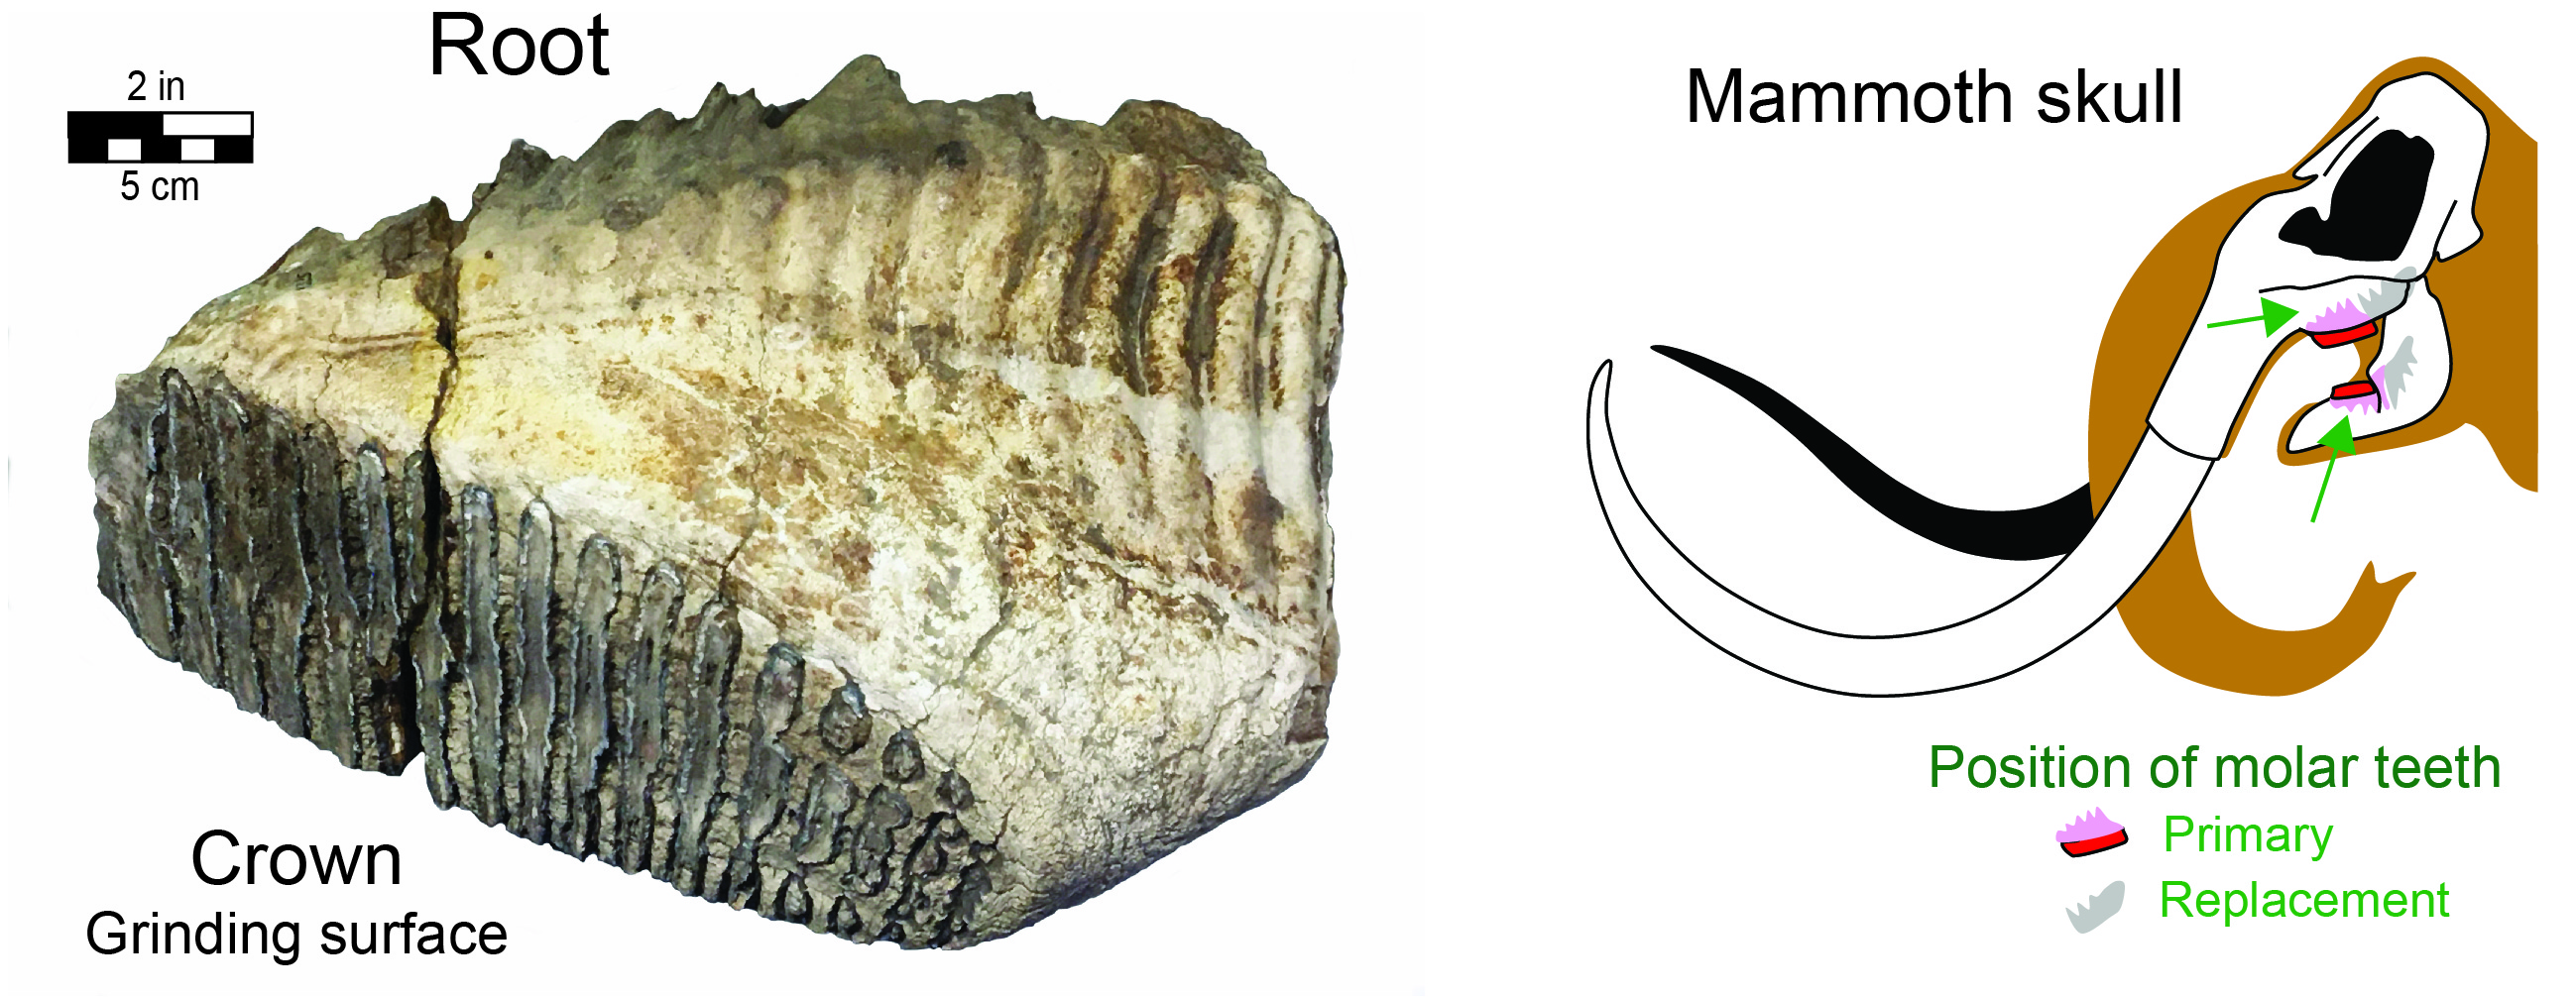 nother mammoth molar tooth, and diagram showing position of molars in the skull.